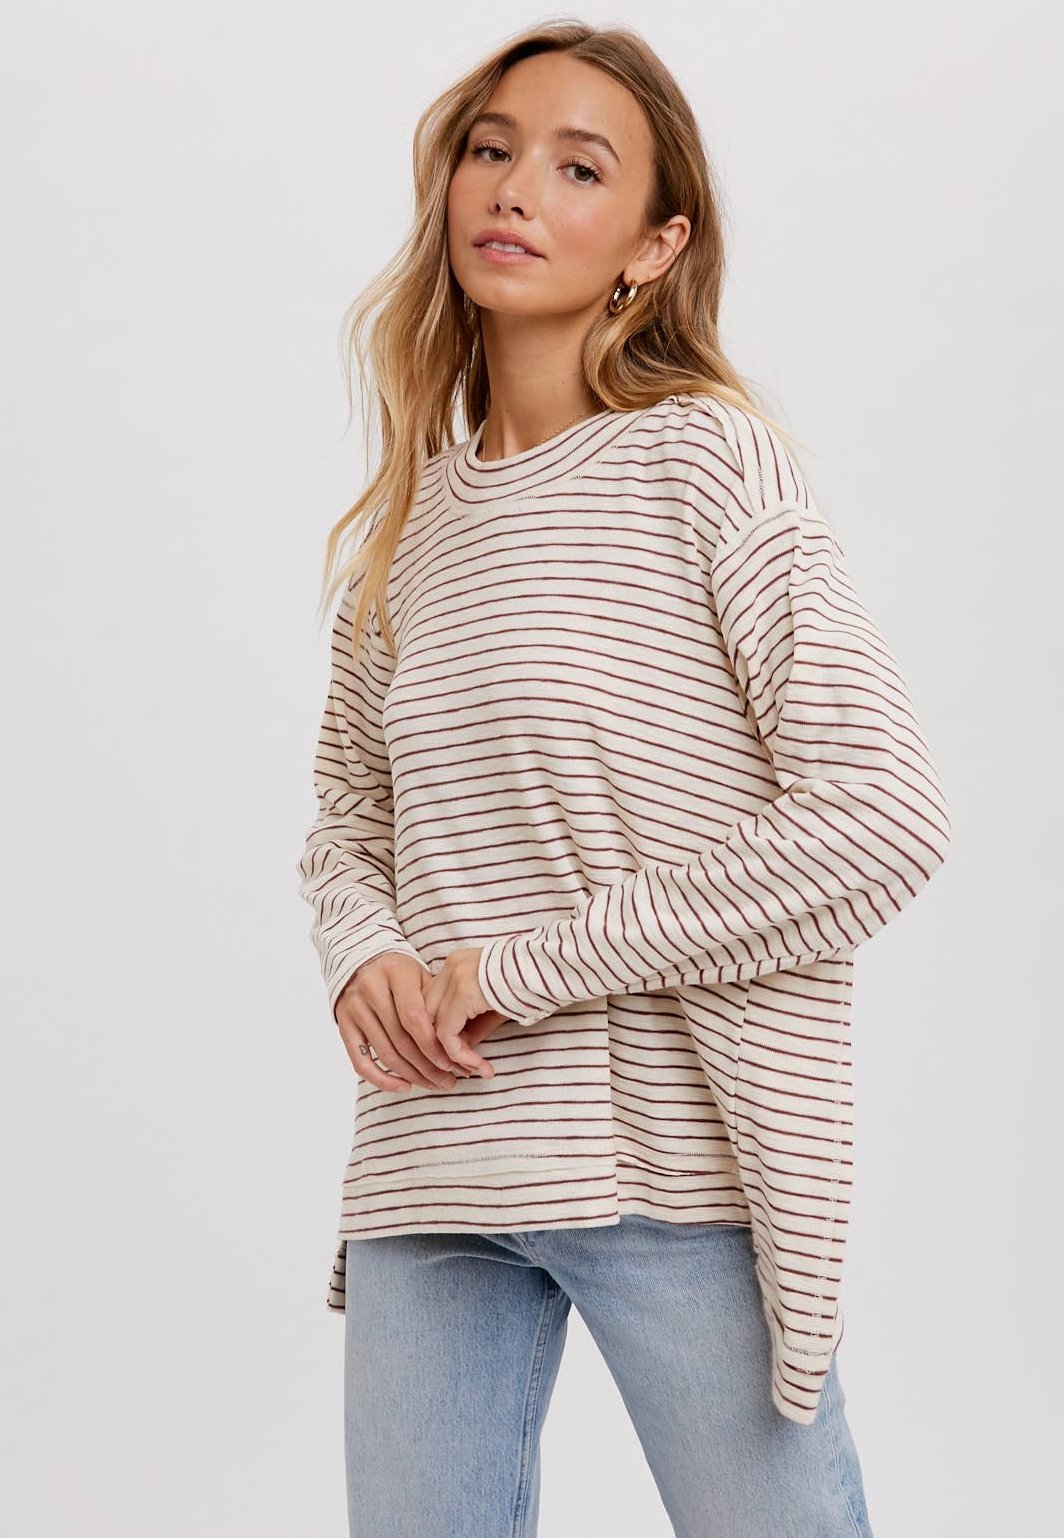 Crewneck Slouchy Stripe Top - Tired Mama Co.